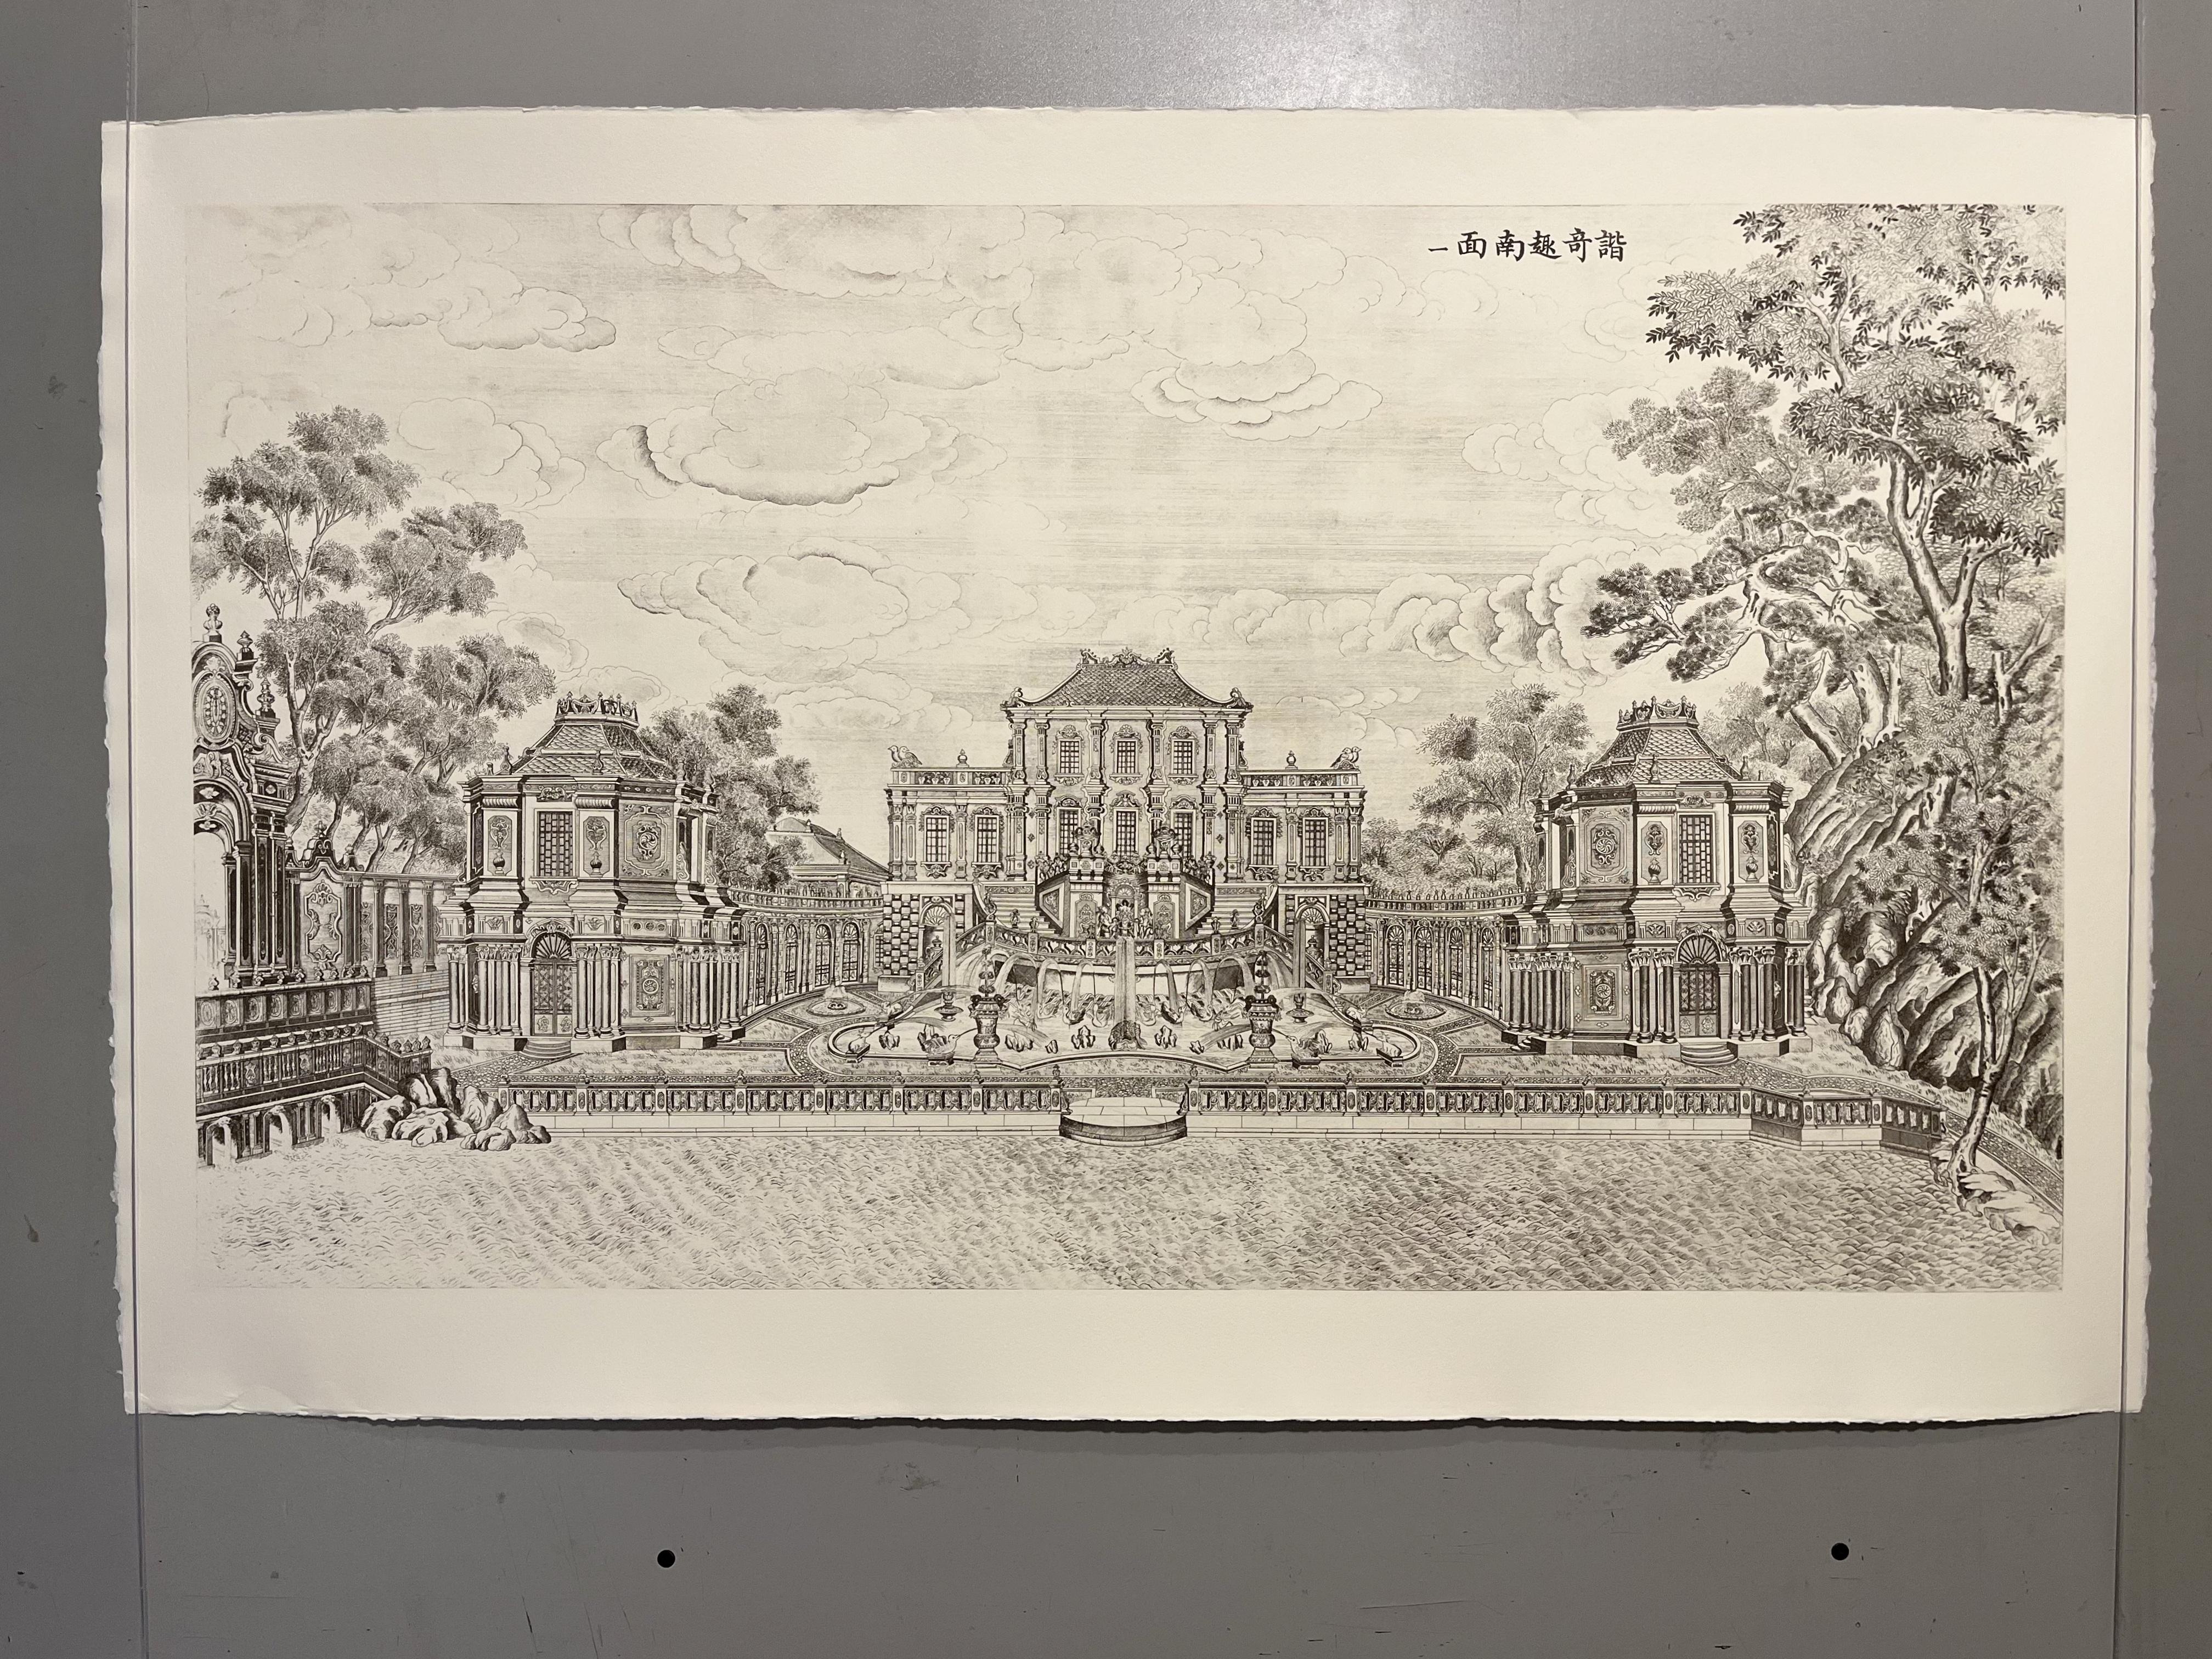 EIGHTEEN ETCHINGS OF PALACES, PAVILIONS AND GARDENS BY GIUSEPPE CASTIGLIONE IN THE IMPERIAL GROUNDS OF THE SUMMER PALACE, BEIJING, YUANMINGYUAN
1977
The original etchings were created for the Qianlong Emperor between 1783 and 1786 by the Jesuit